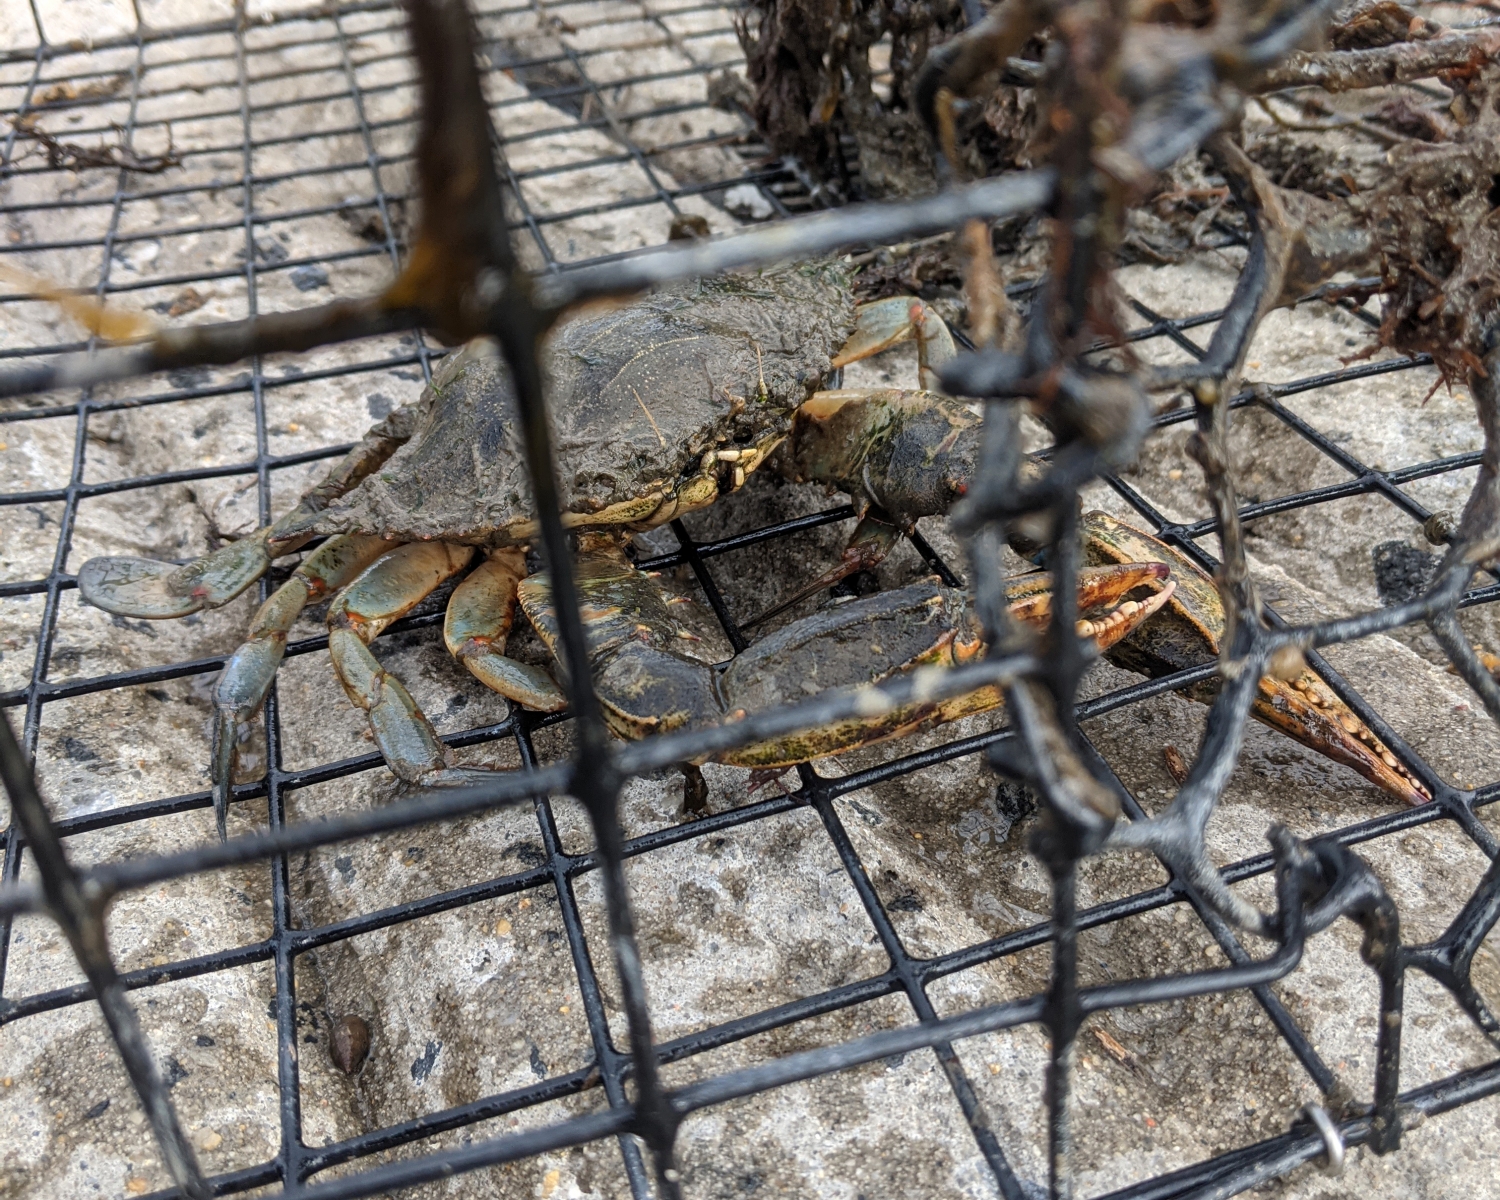 After being discarded, 'ghost pots' continue to trap Bay's blue crabs